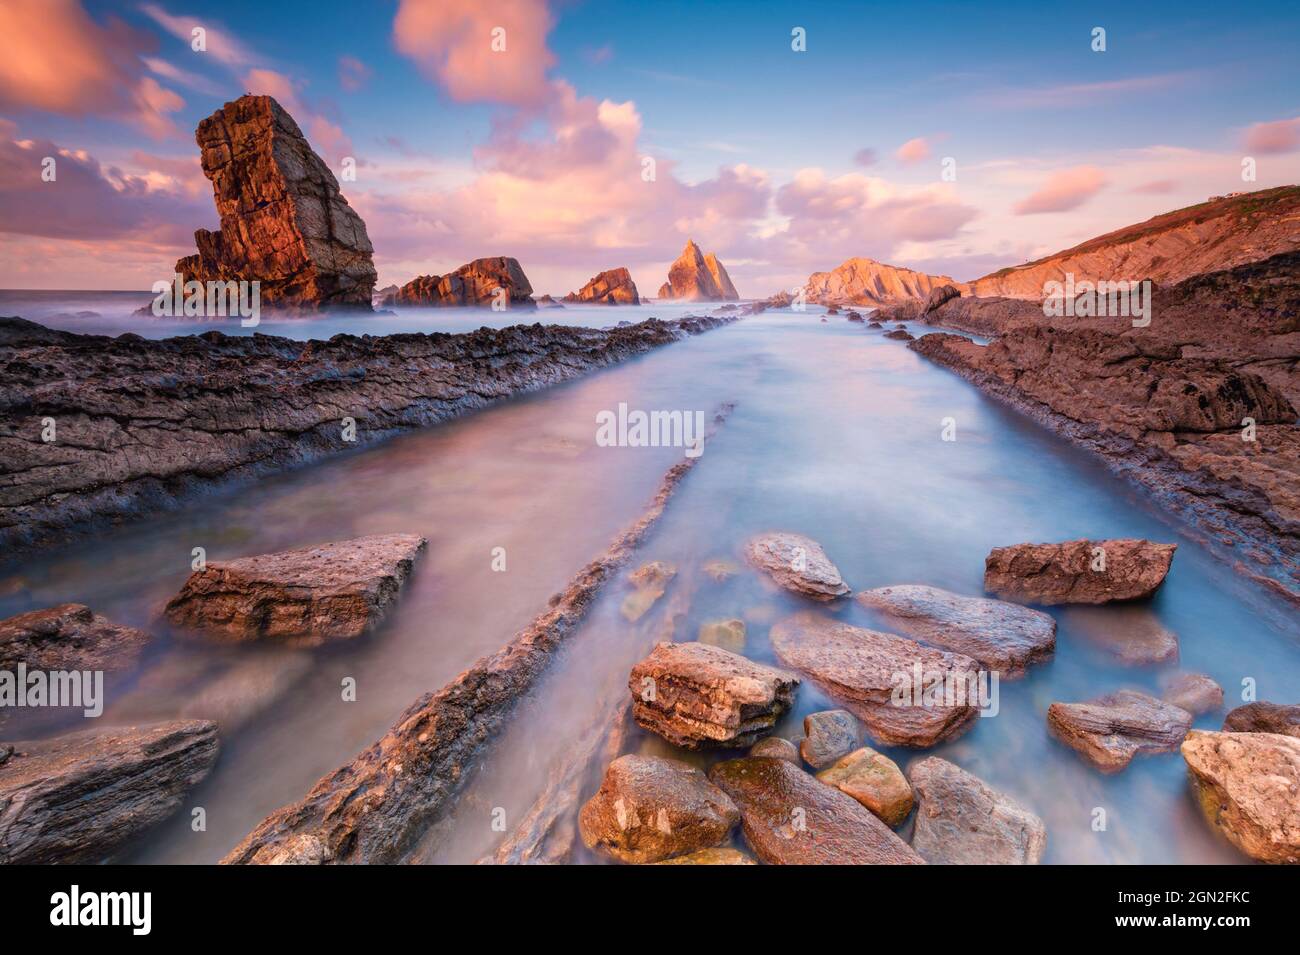 SPAIN, CANTABRIA, LIENCRES. VIEW FROM BELOW OF ARNIA BEACH WITH ITS ROCKS CUT OUT AT SUNSET AND IN THE FOREGROUND A PILE OF PEBBLES IN THE WATER Stock Photo